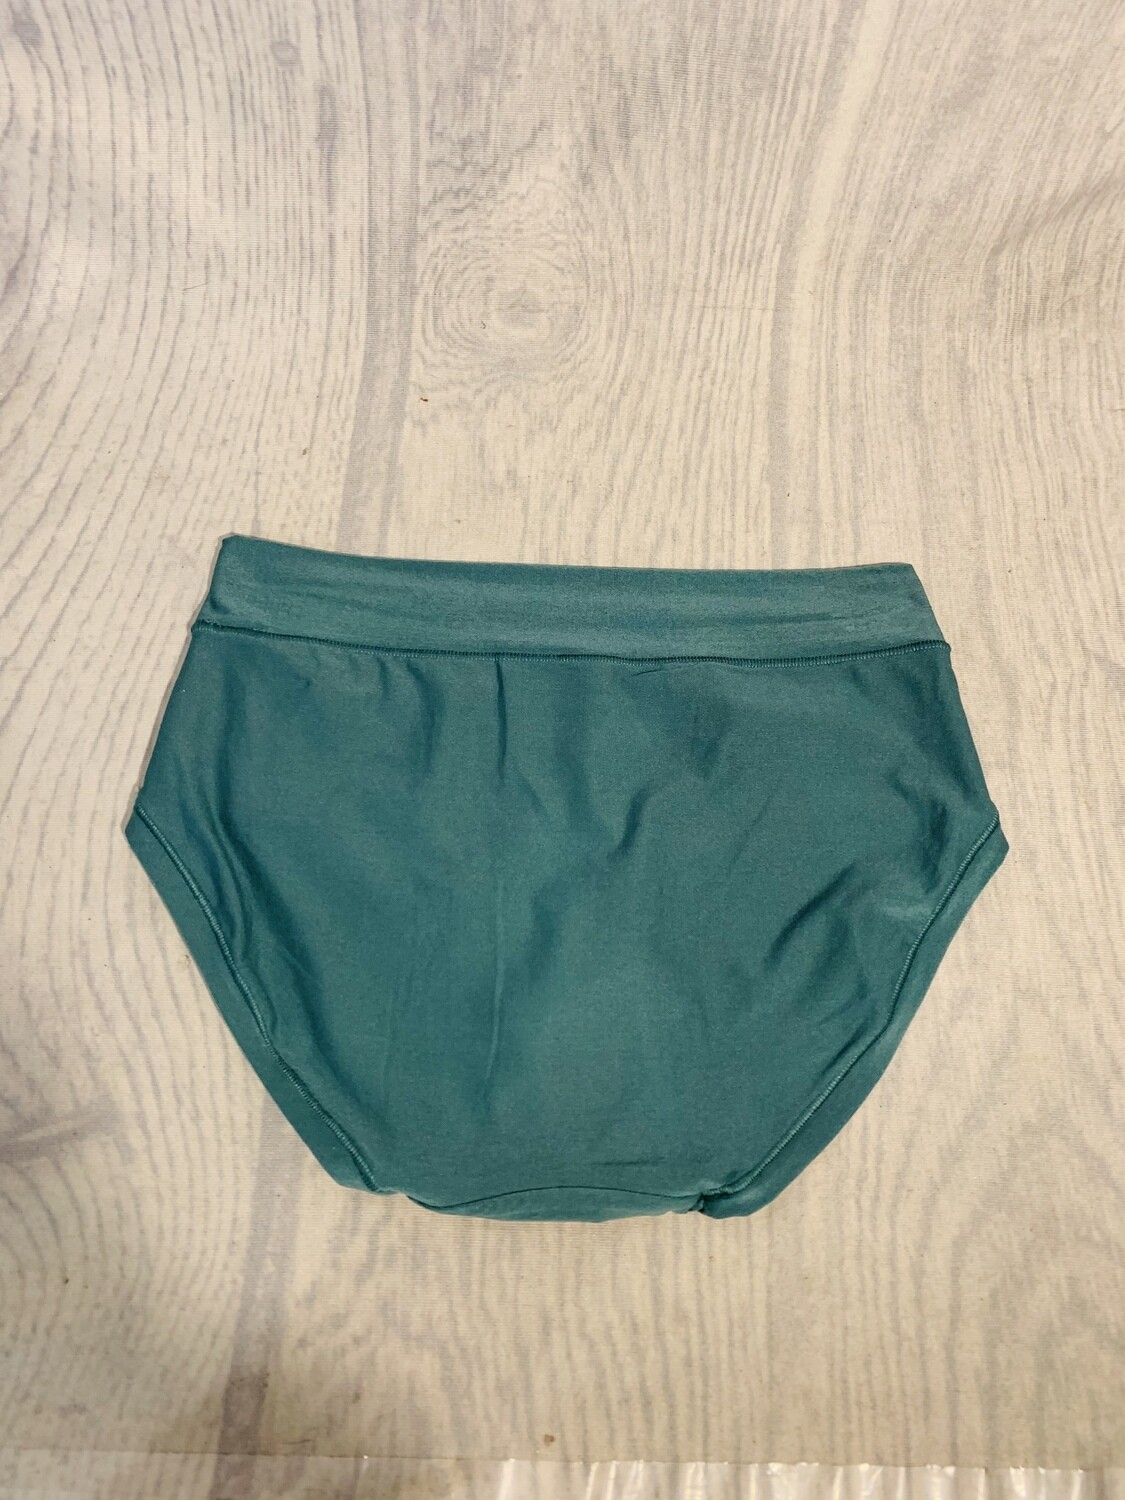 Size Small Aerie Real Me Boybrief Underwear Aerie Green